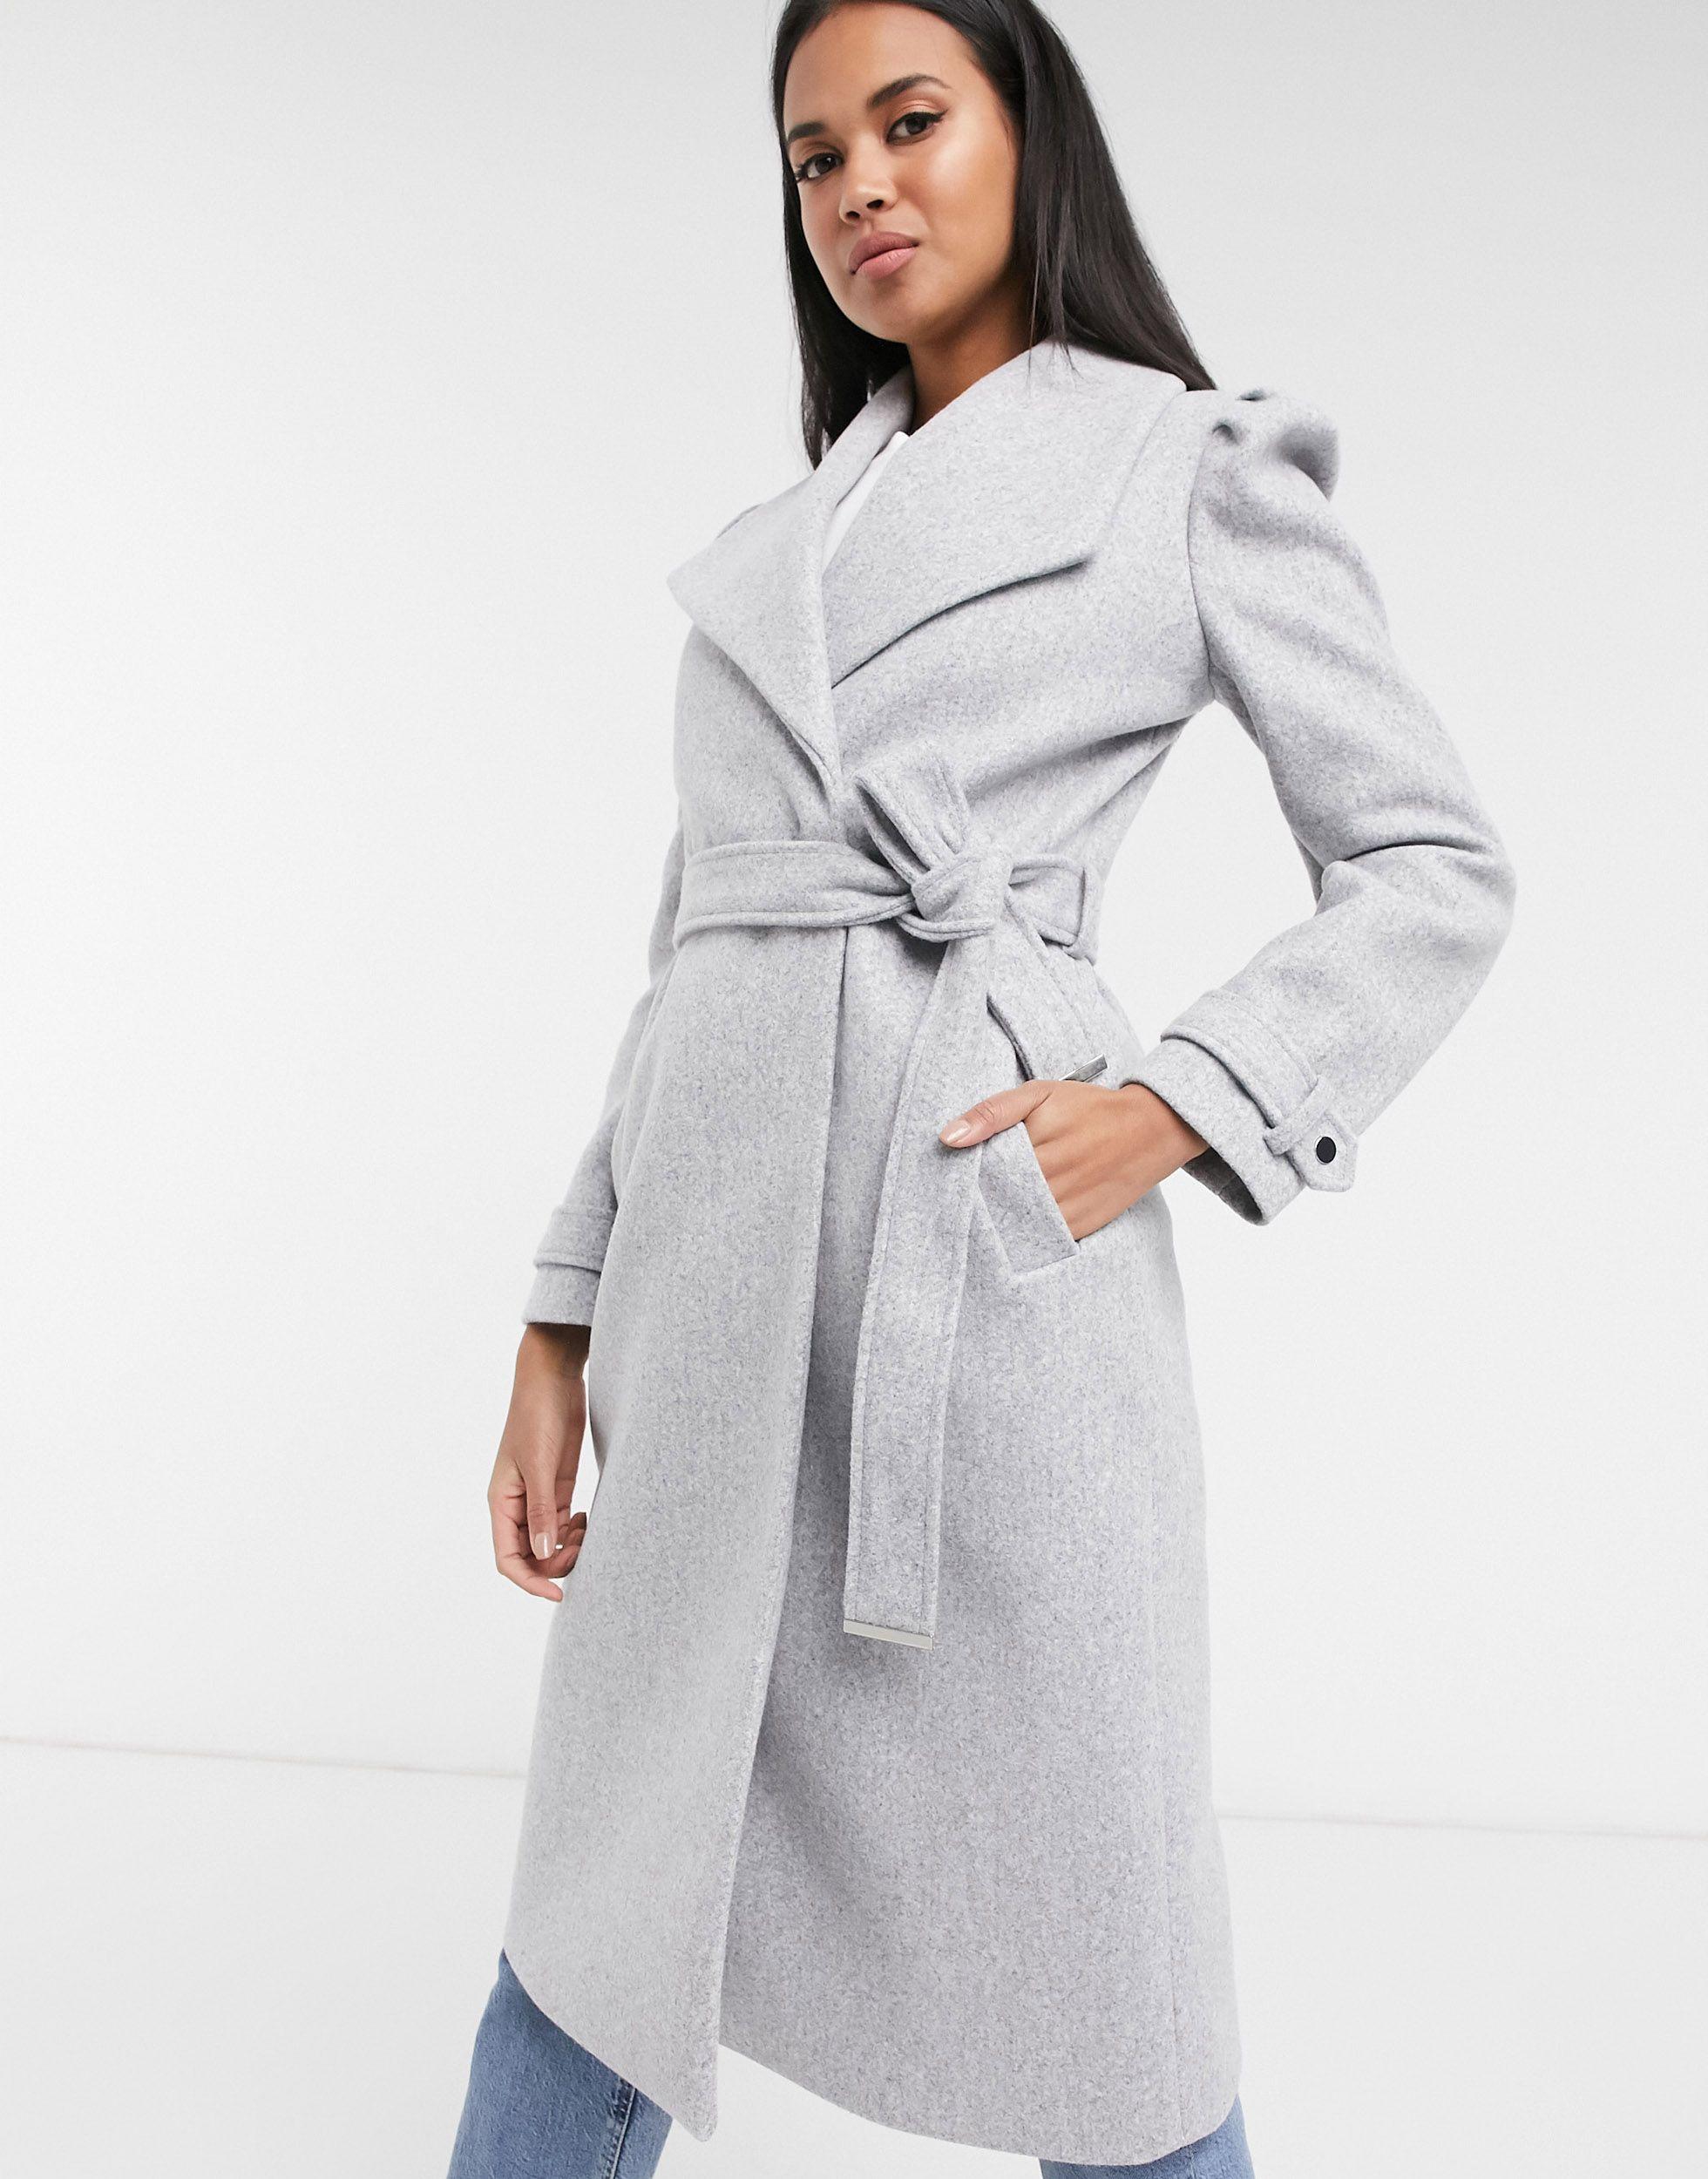 River Island Puff-sleeved Belted Robe Coat in Gray | Lyst